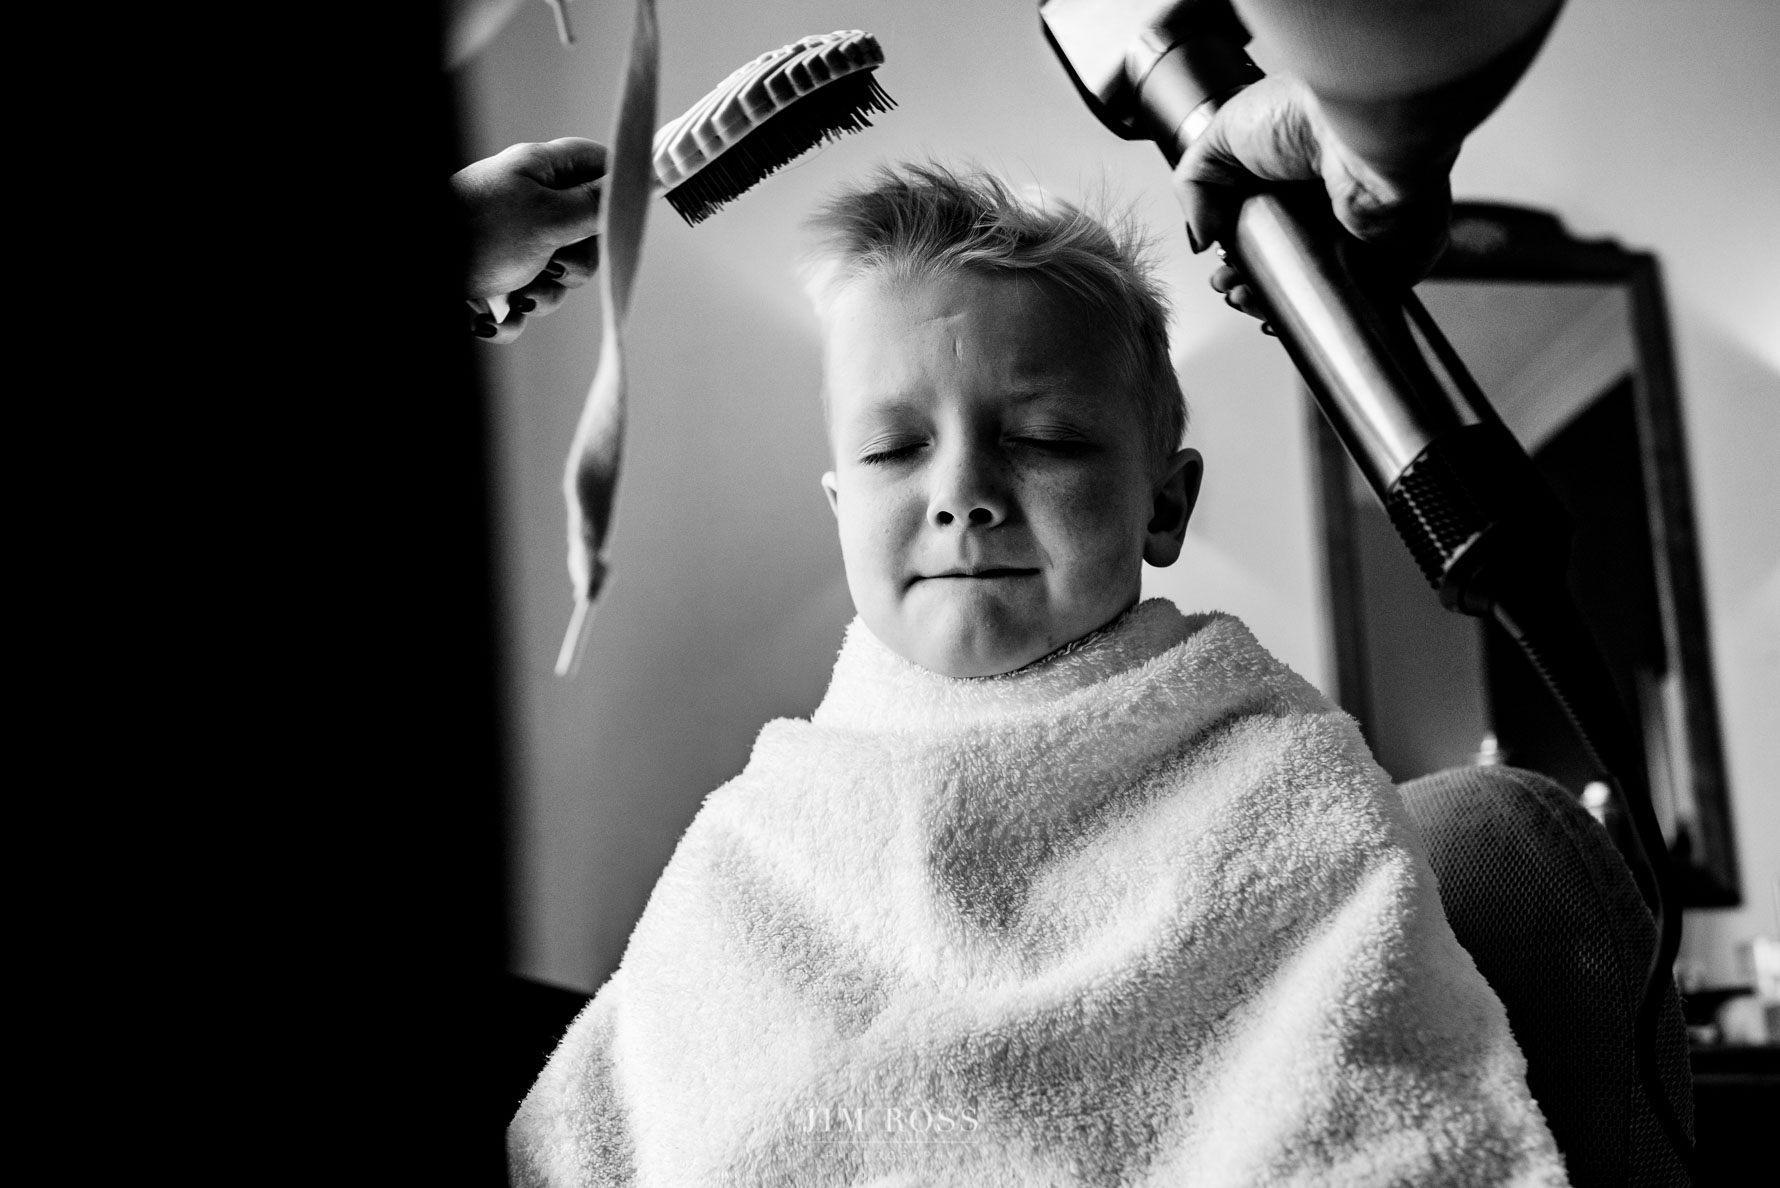 page boy grimacing at hairdryer treatment